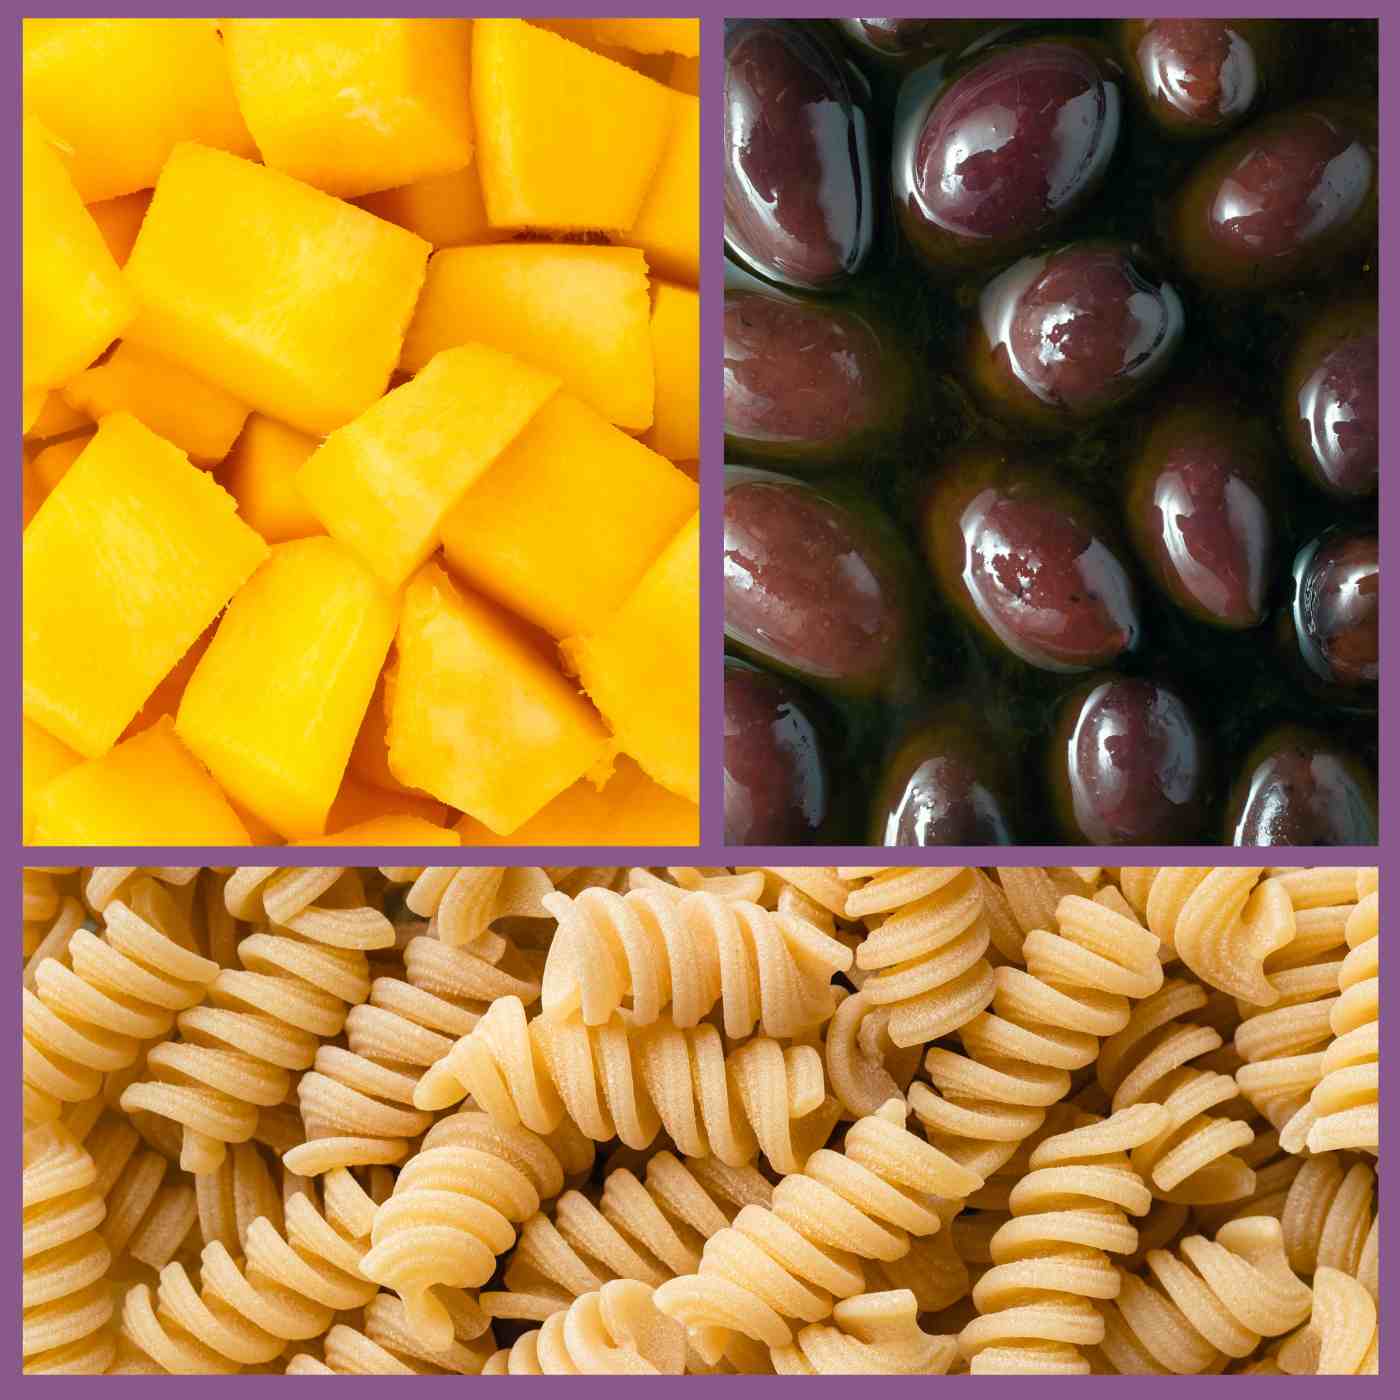 olives, mangoes and pasta